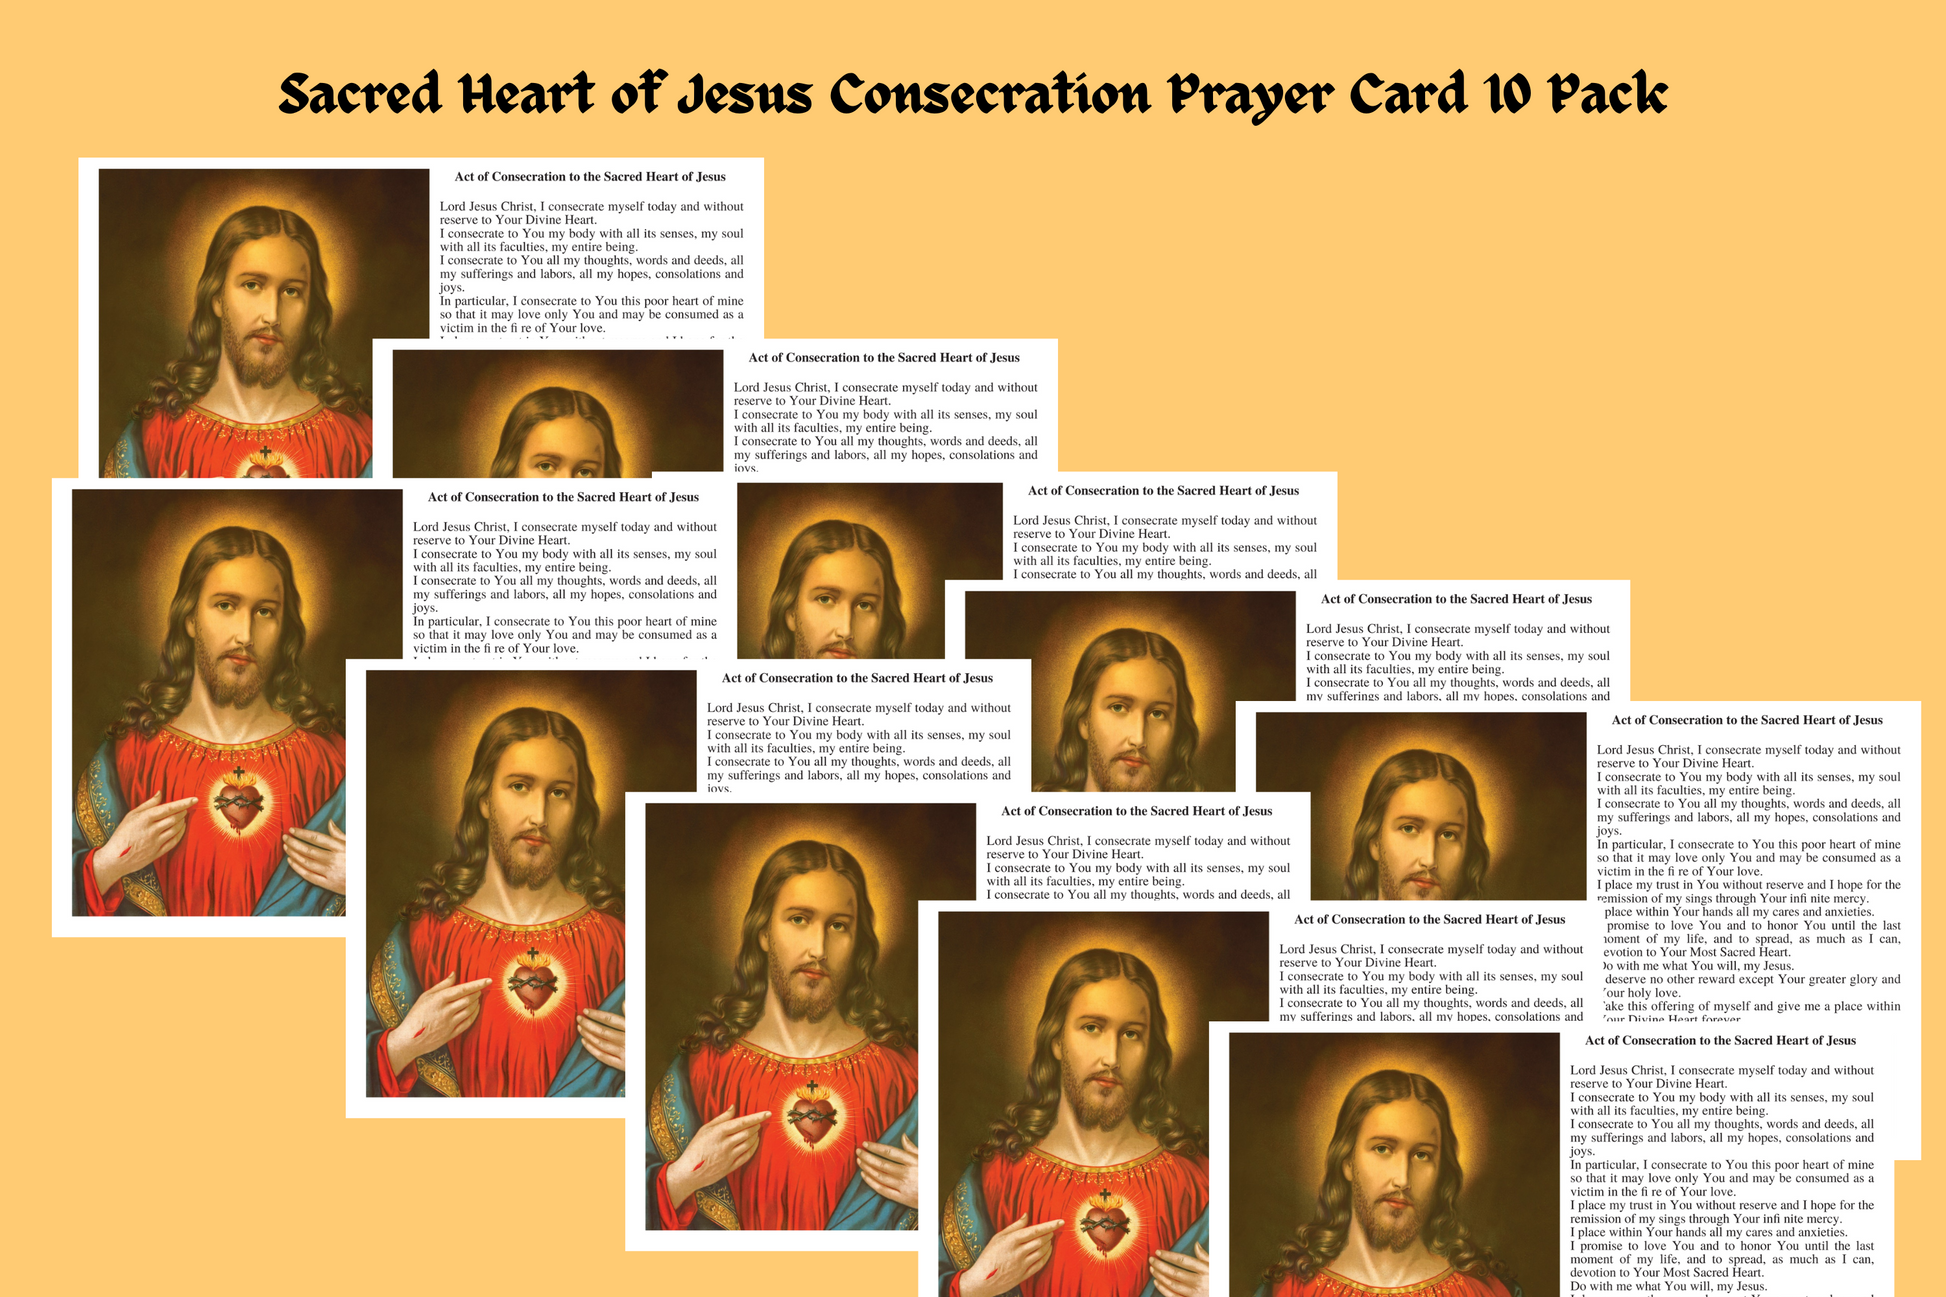 Sacred Heart of Jesus Consecration Prayer Card - Bob and Penny Lord